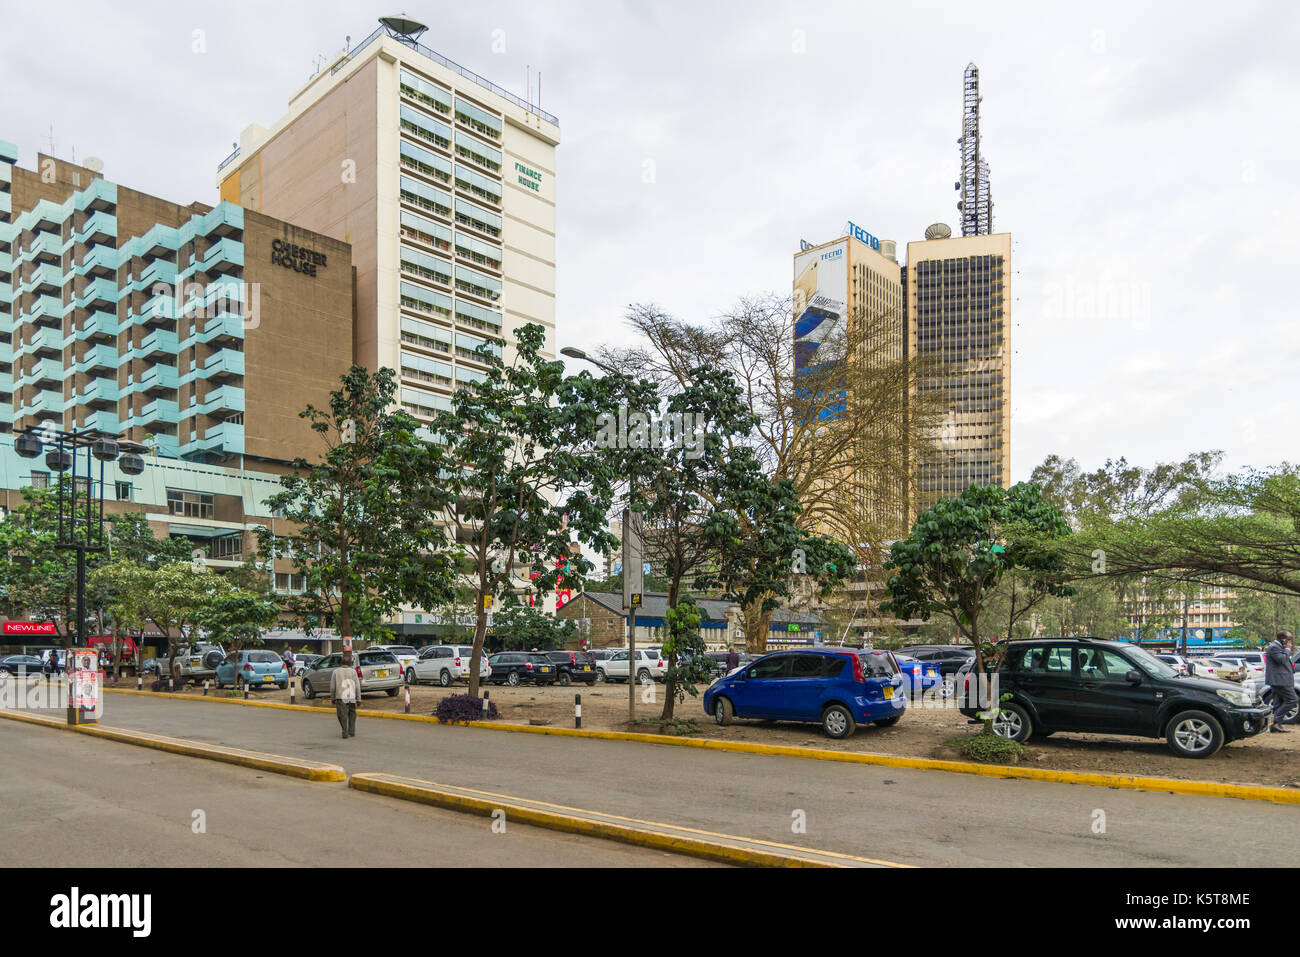 Large car park with vehicles parked with buildings in background, Nairobi, Kenya Stock Photo